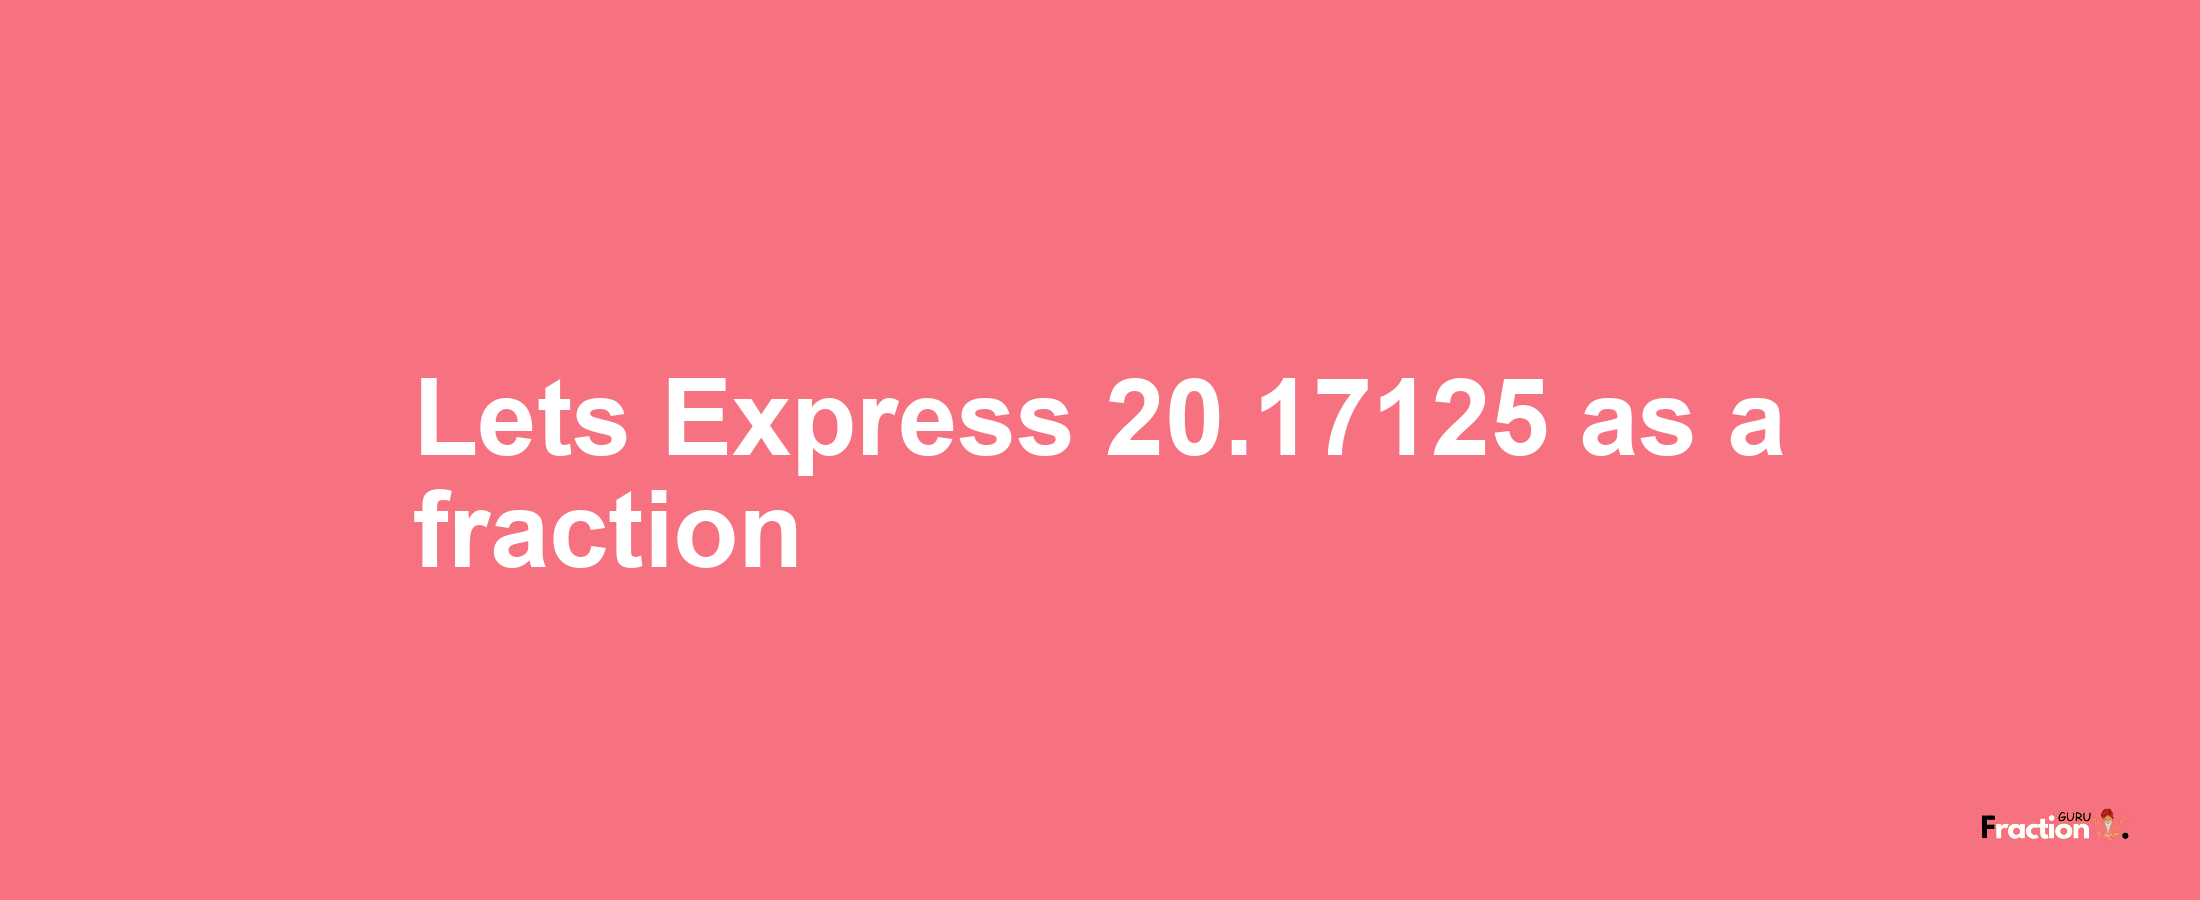 Lets Express 20.17125 as afraction